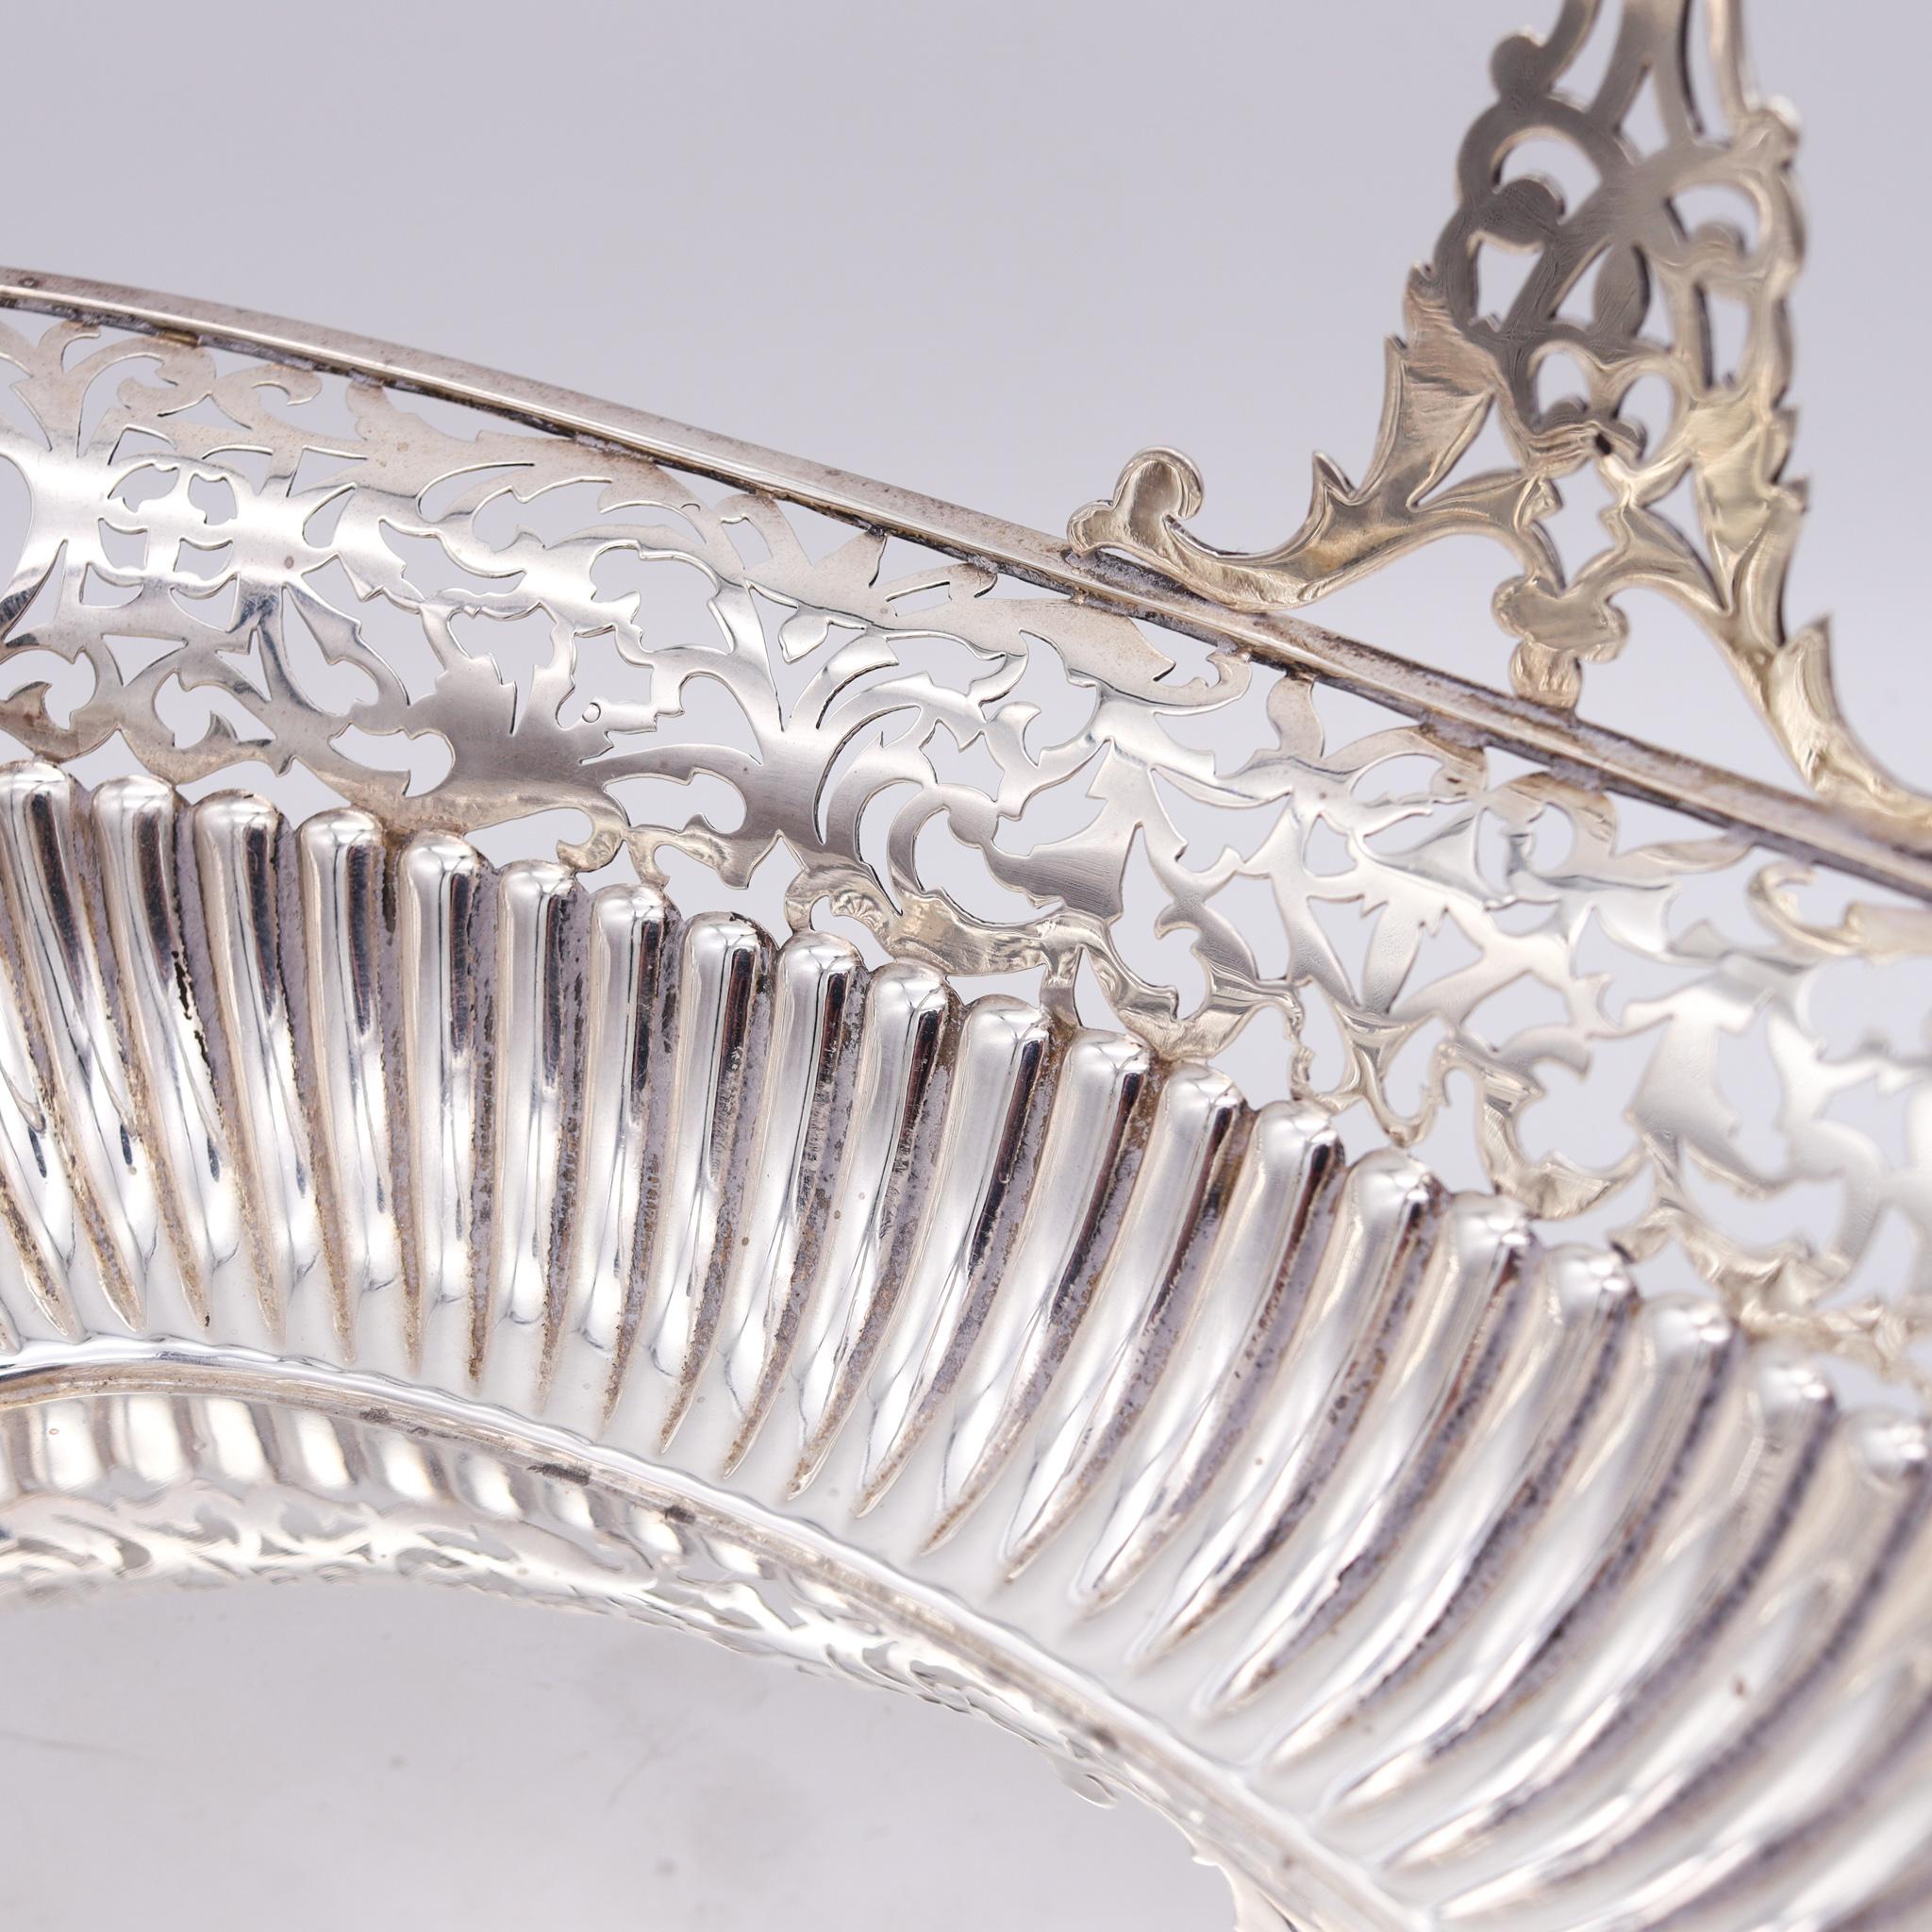 North American American 1920 Vintage Navette Sweetmeat Basket with Handle .925 Sterling Silver For Sale